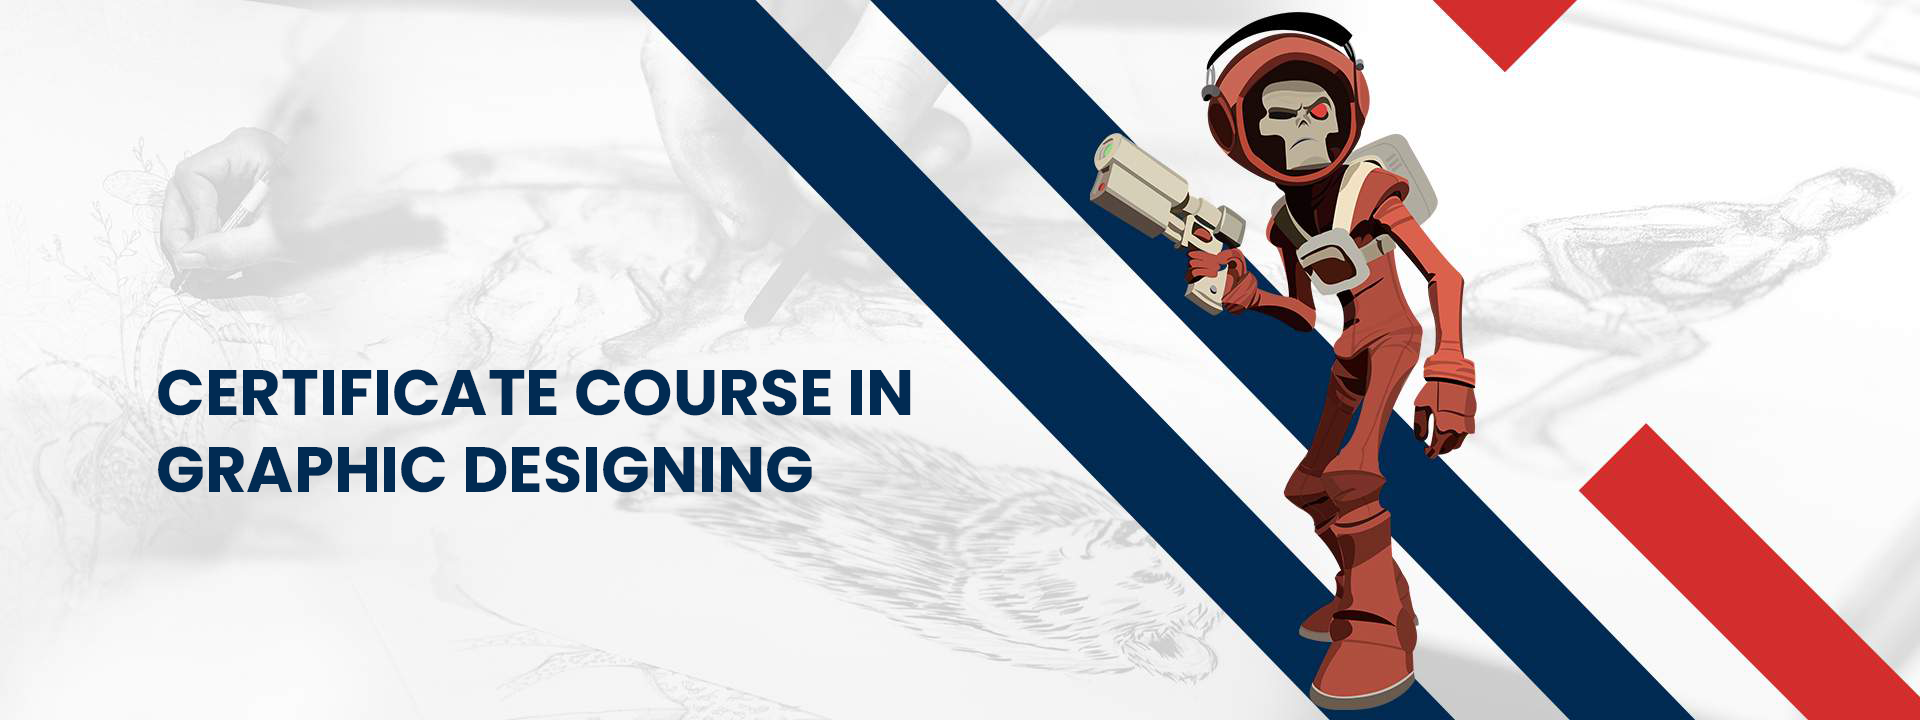 Graphic Designing Course in Kolkata | Red Apple Learning